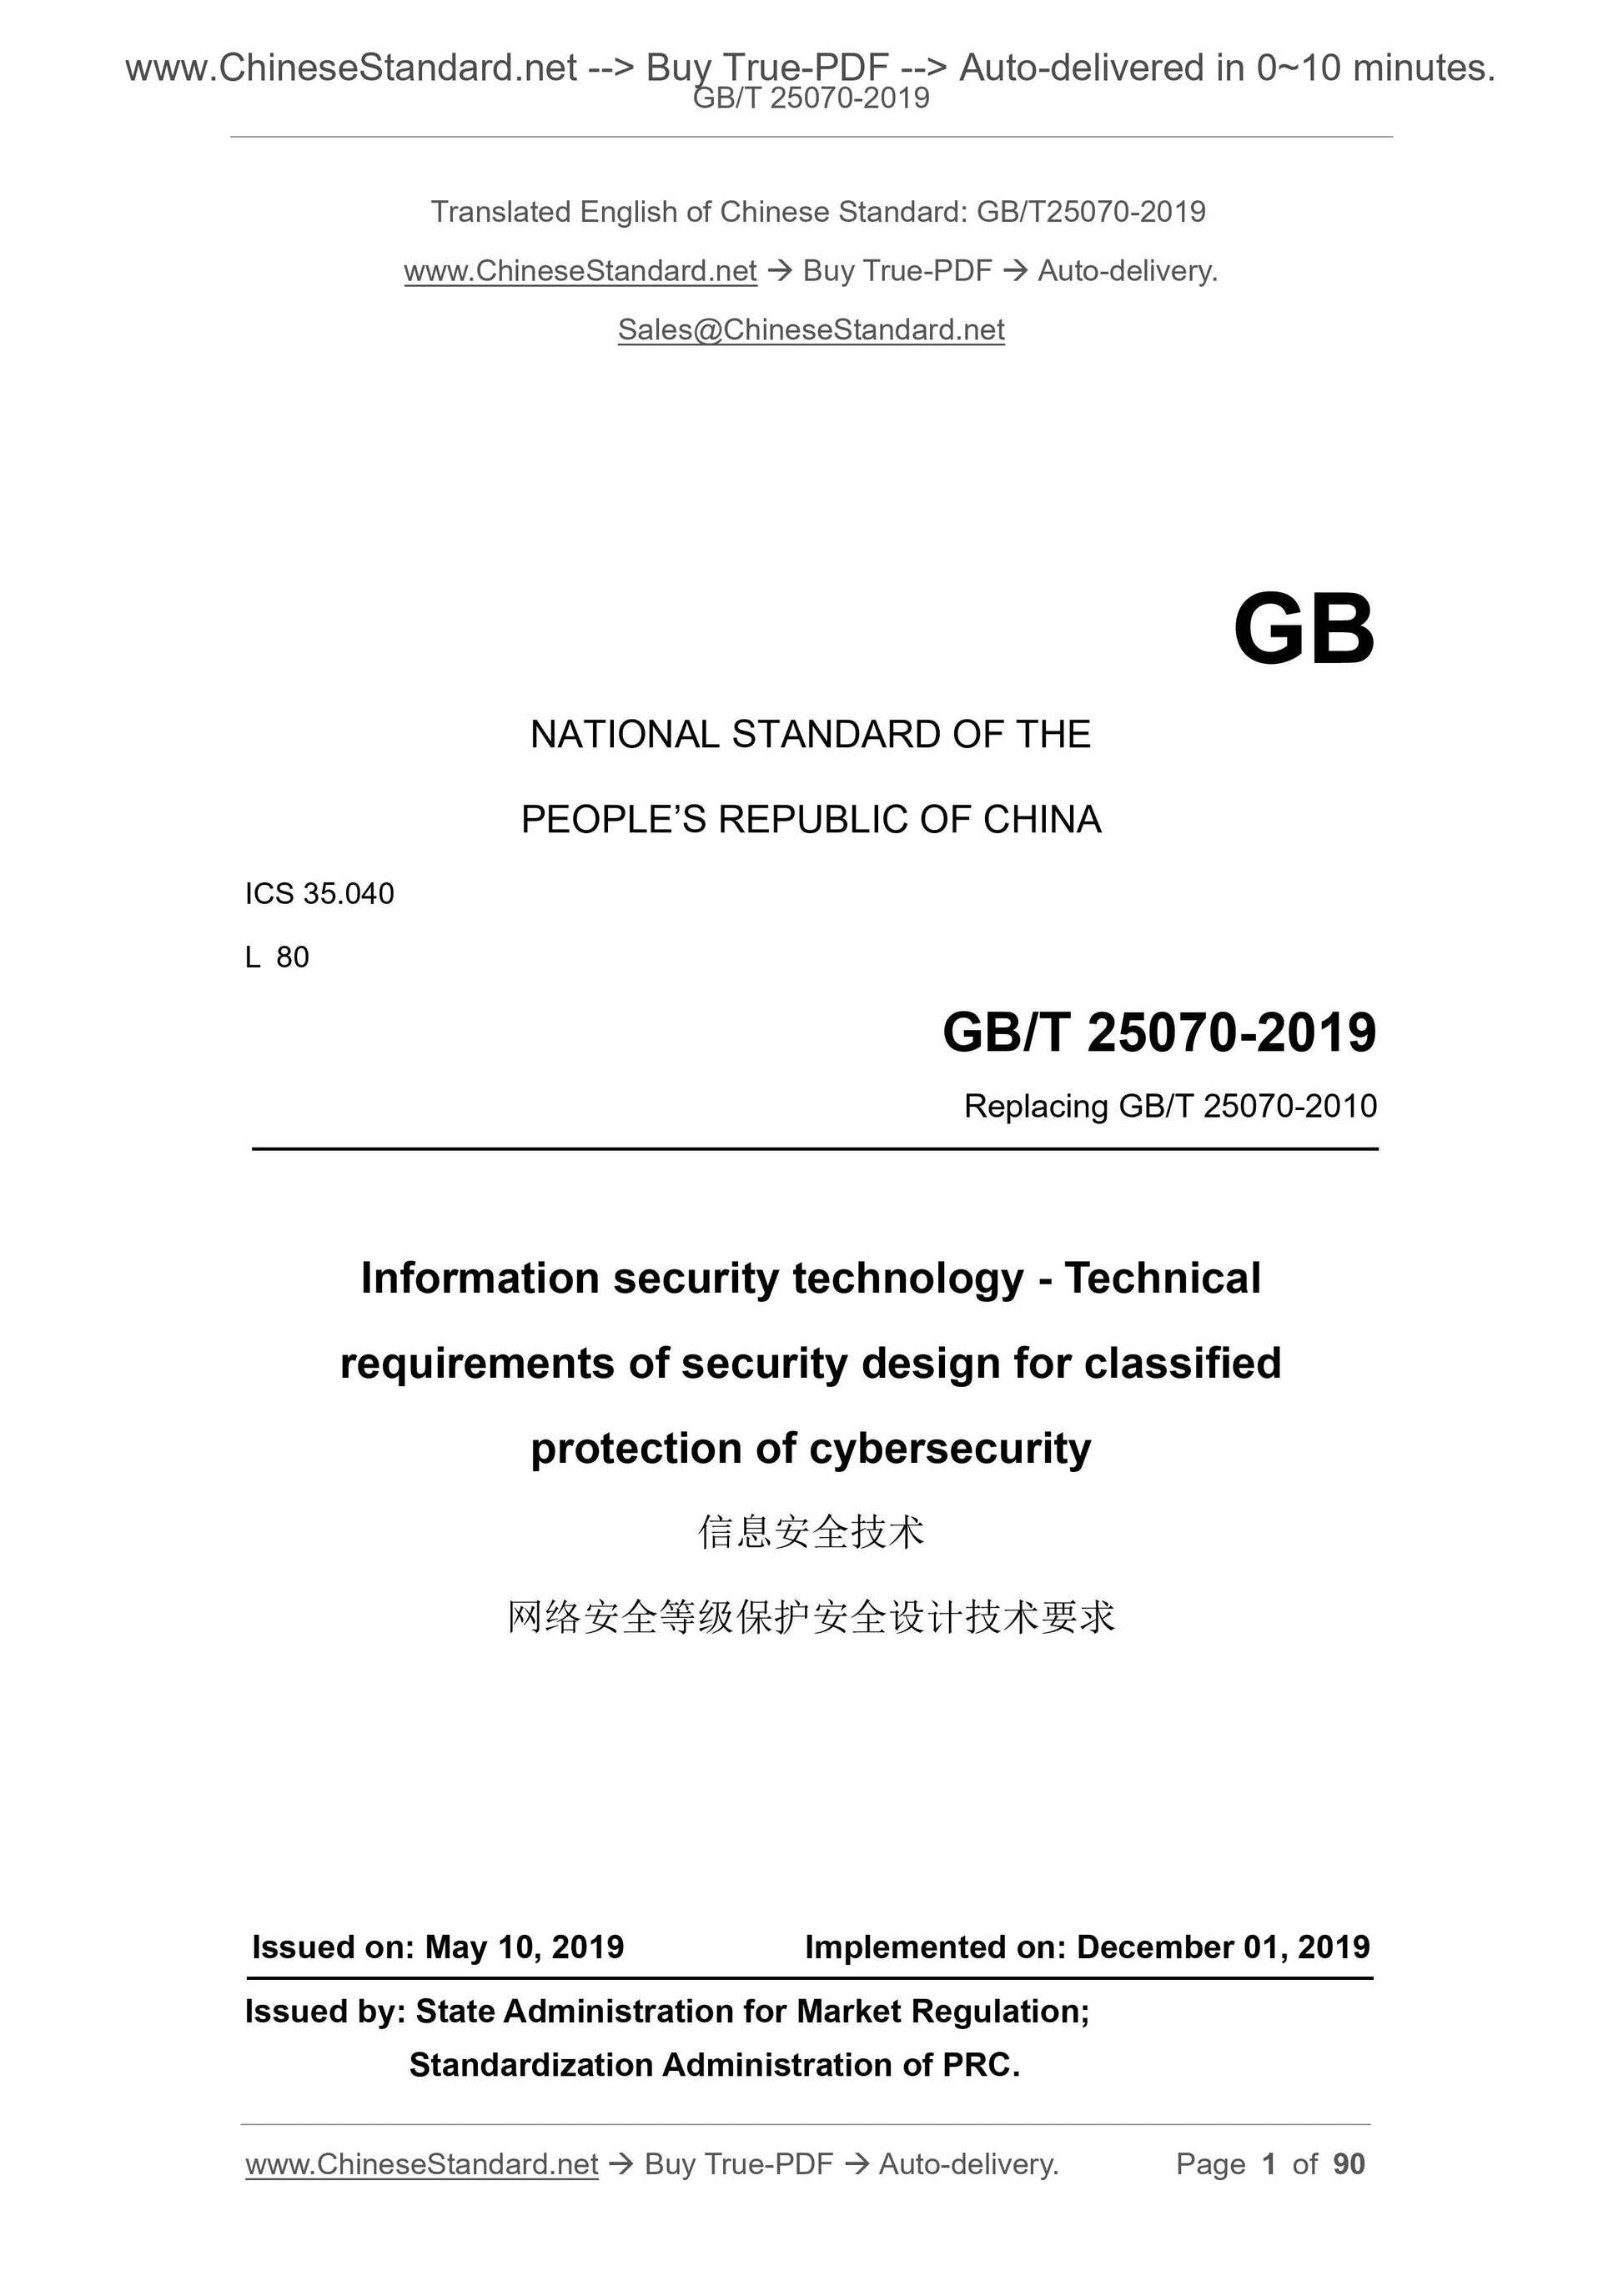 GB/T 25070-2019 Page 1